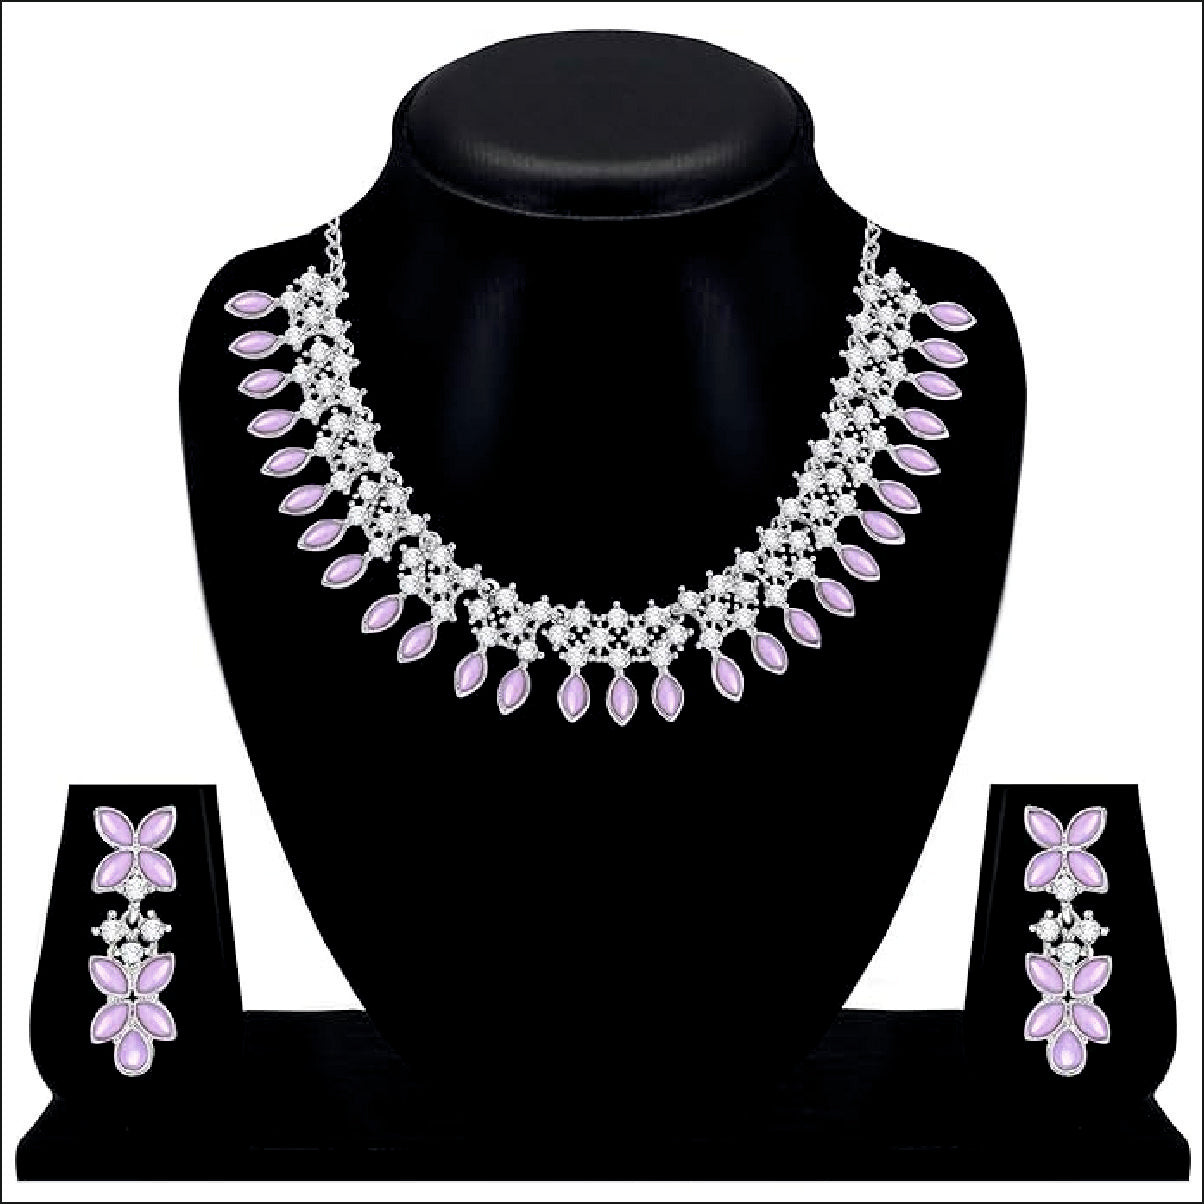 Timeless Treasure Necklace Crystals AD Diamond Jewellery Necklace Set for Women